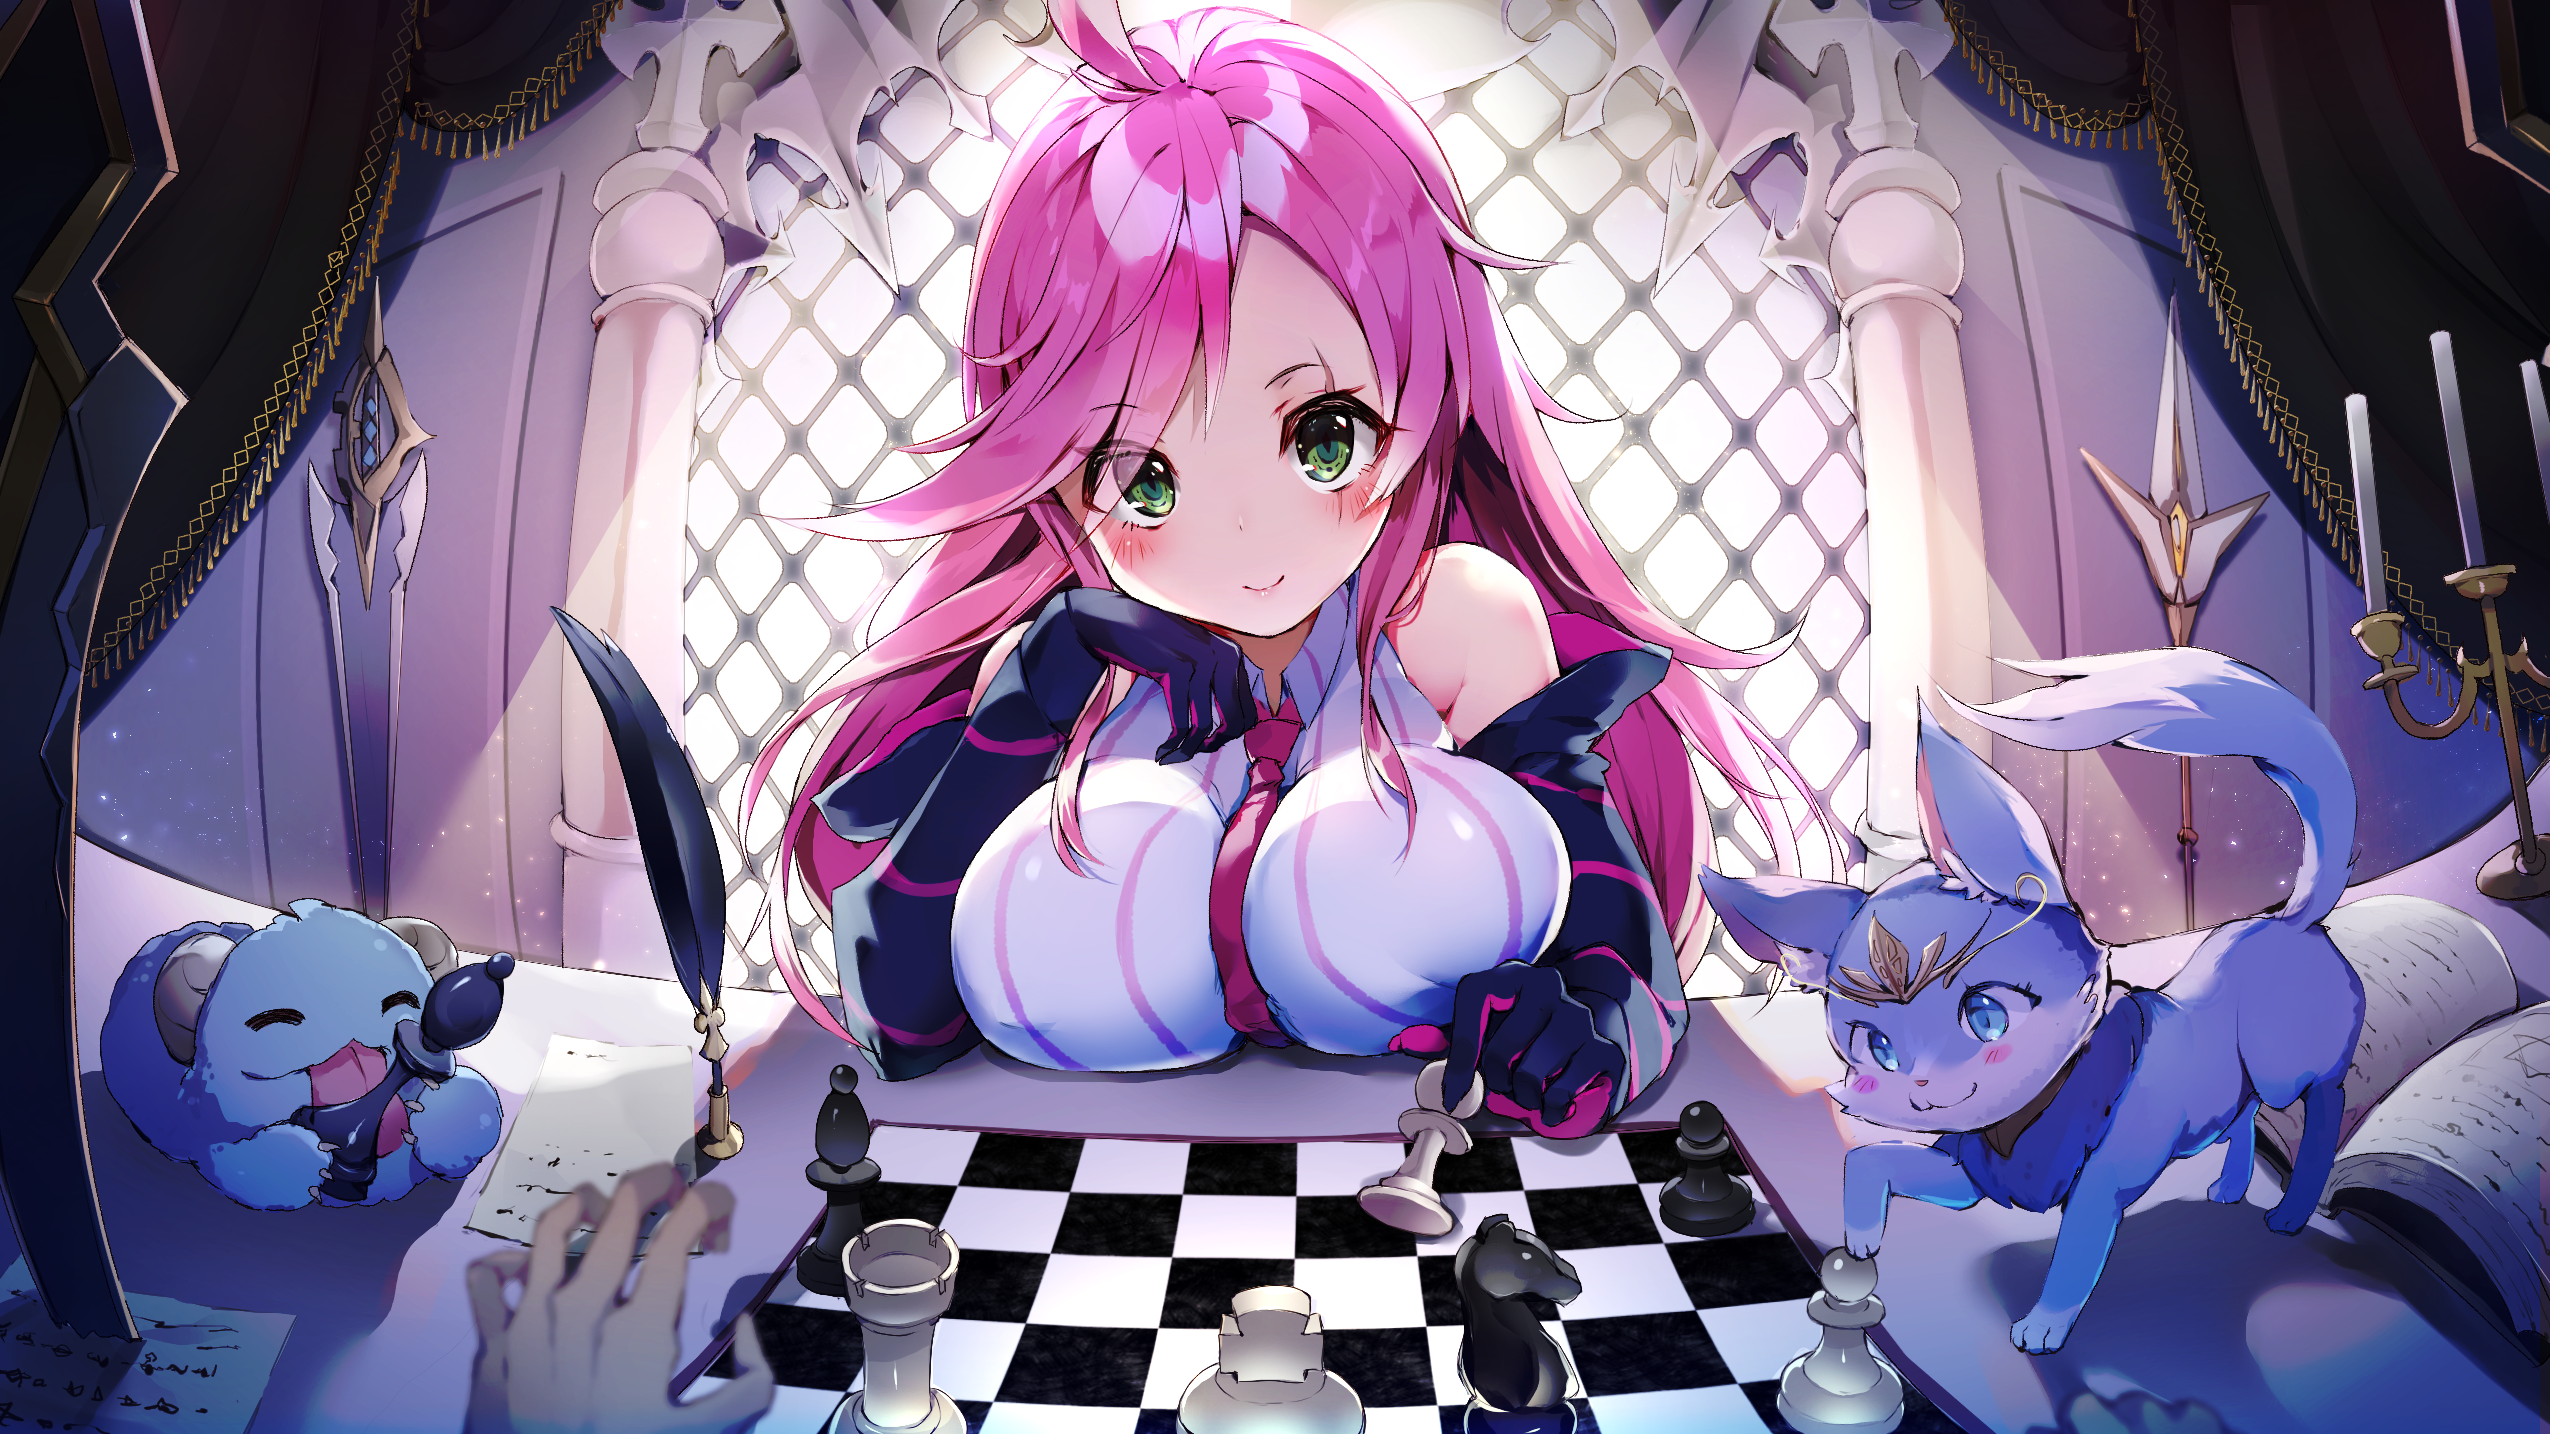 Anime 2550x1434 League of Legends pink hair green eyes long hair blushing gloves tie paper feathers Katarina (League of Legends) chess POV frontal view chessboard looking at viewer pawns sword window resting head big boobs leaning bare shoulders animals creature fantasy art elbow gloves centered fisheye lens quills books Star of David candles playing anime anime girls boobs huge breasts women video game girls video game art PC gaming board games